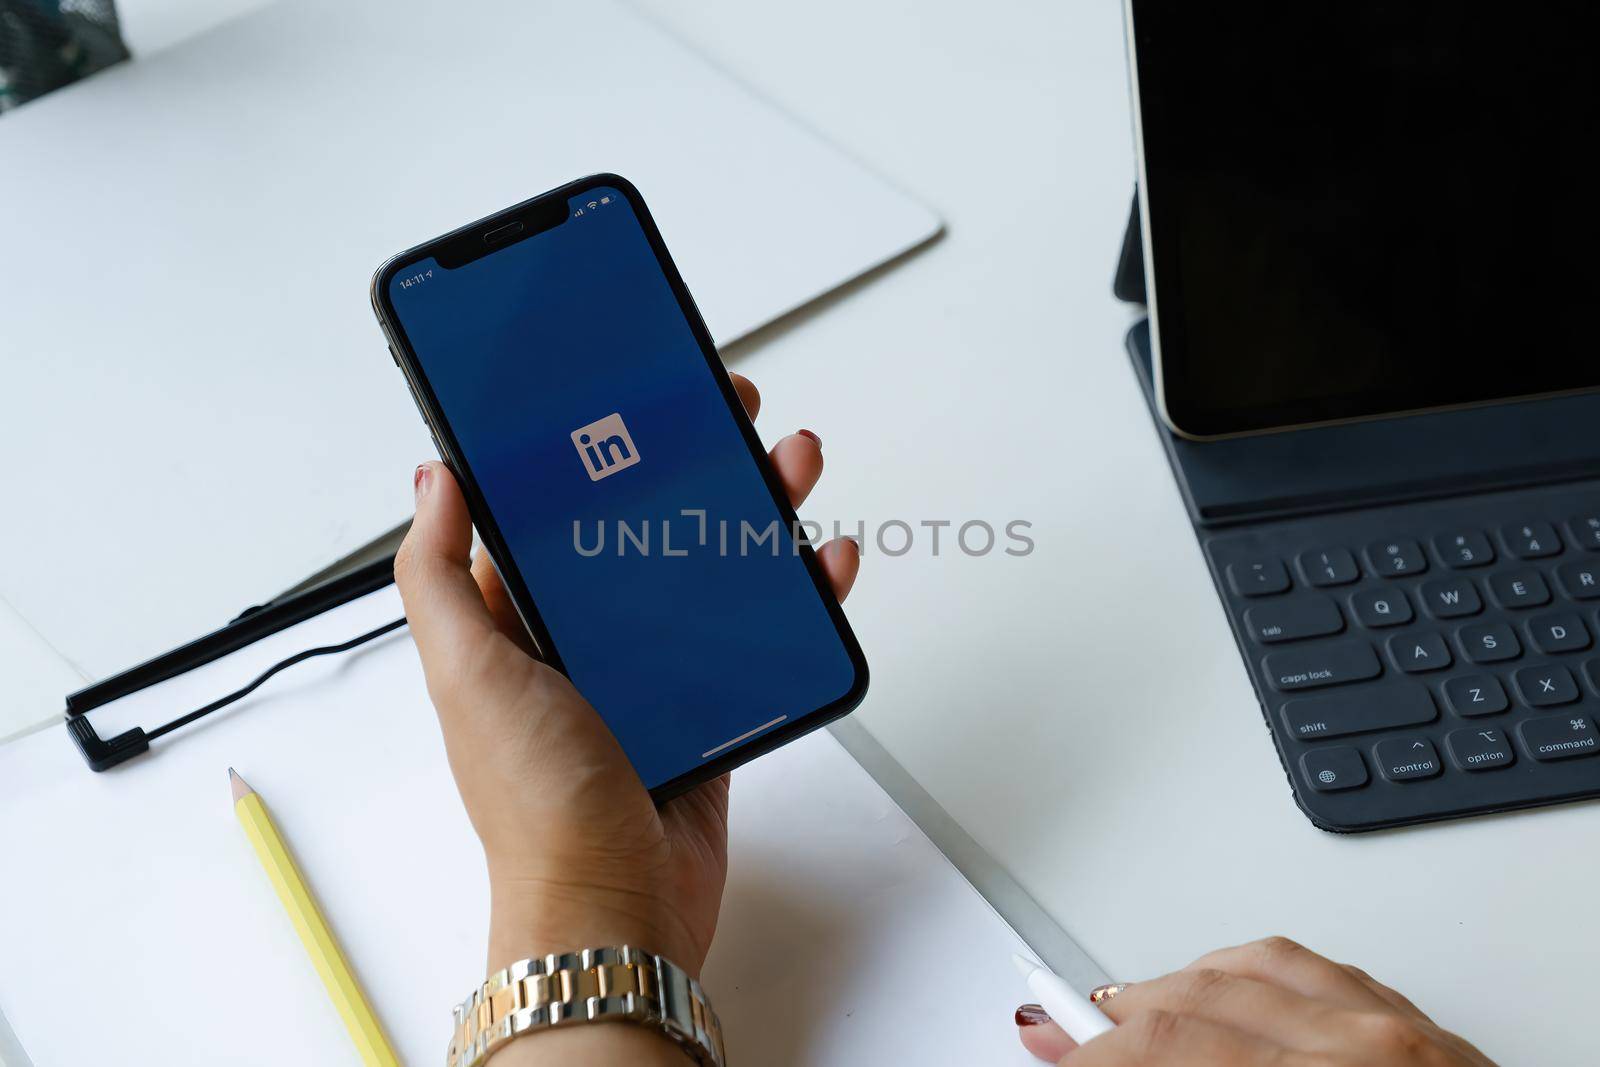 CHIANG MAI, THAILAND: APR 17, 2021 : LinkedIn logo on phone screen. LinkedIn is a social network for search and establishment of business contacts. It is founded in 2002